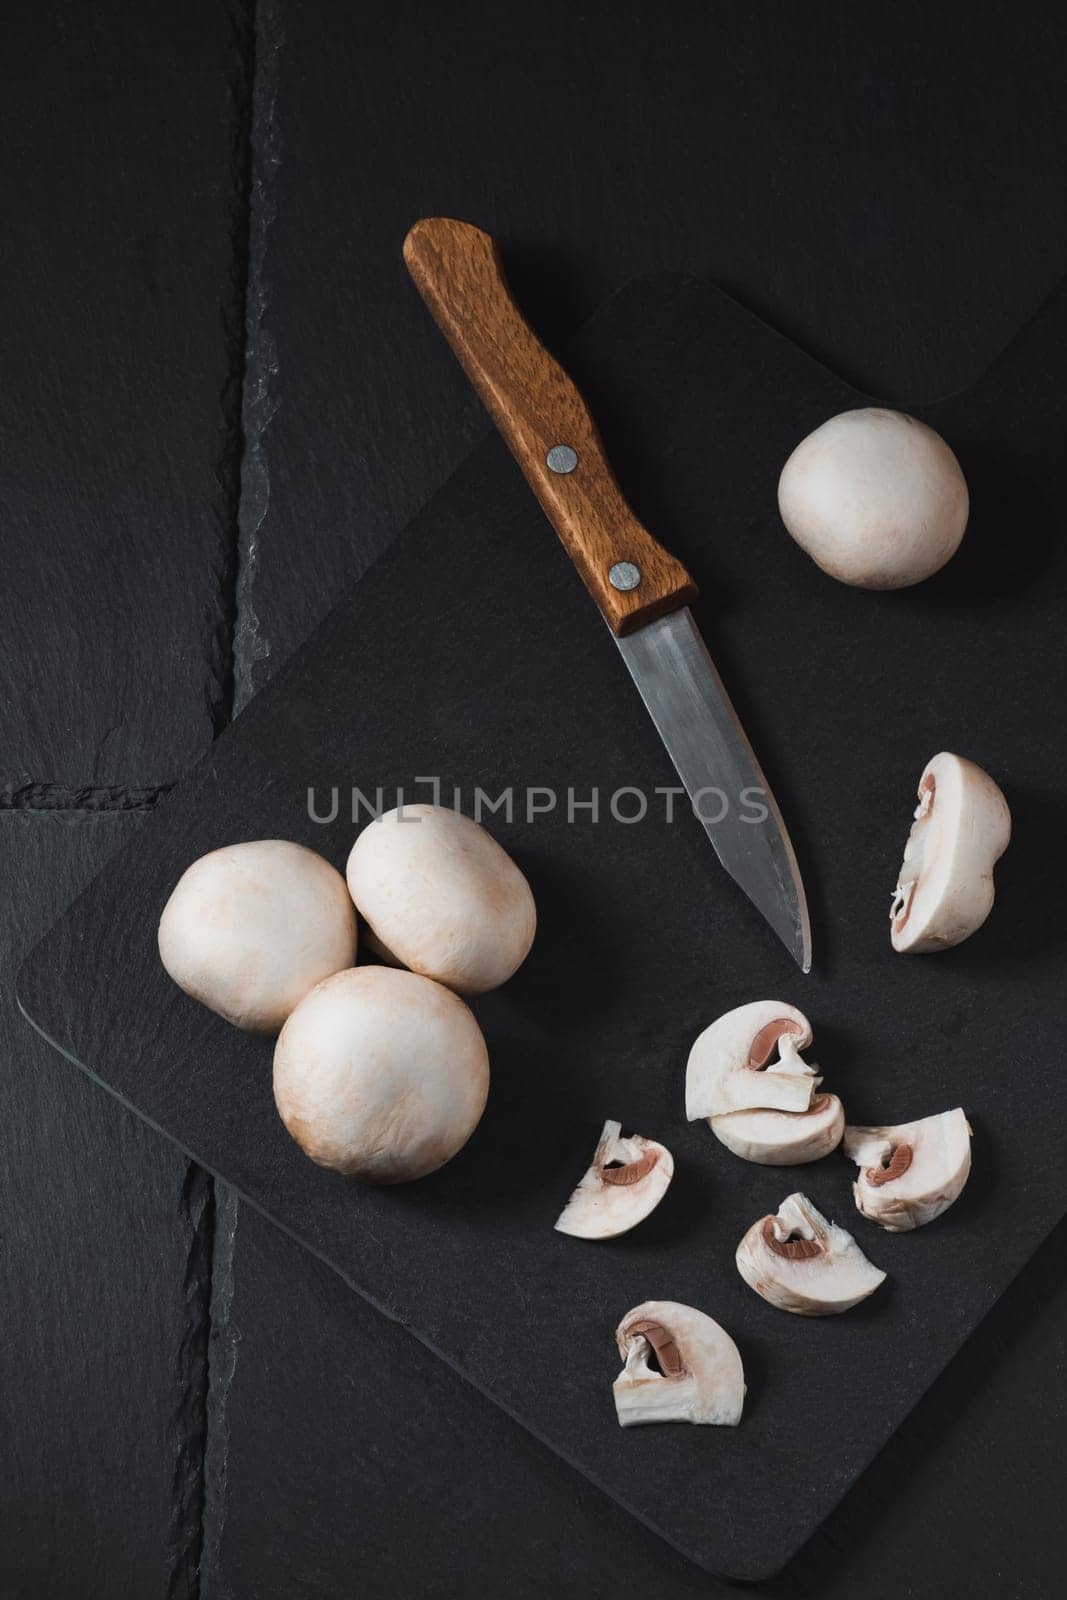 Sliced champignons on a board next to a knife